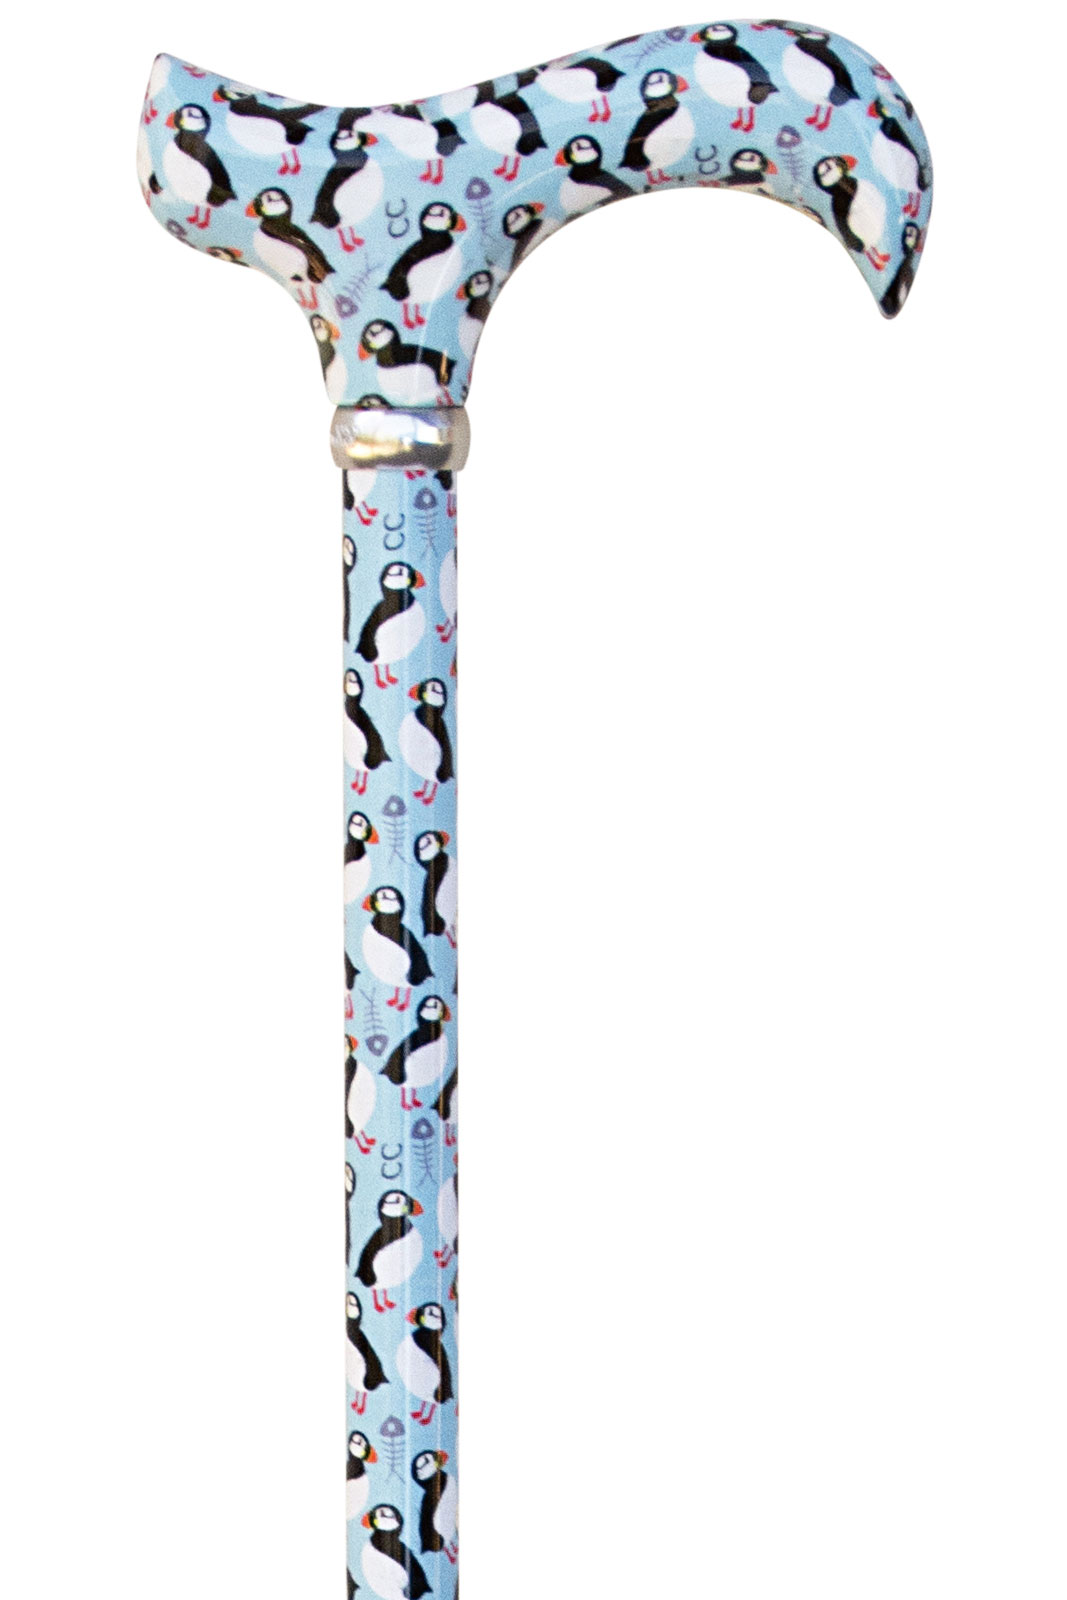 Classic Canes Puffins Derby Adjustable Walking Stick